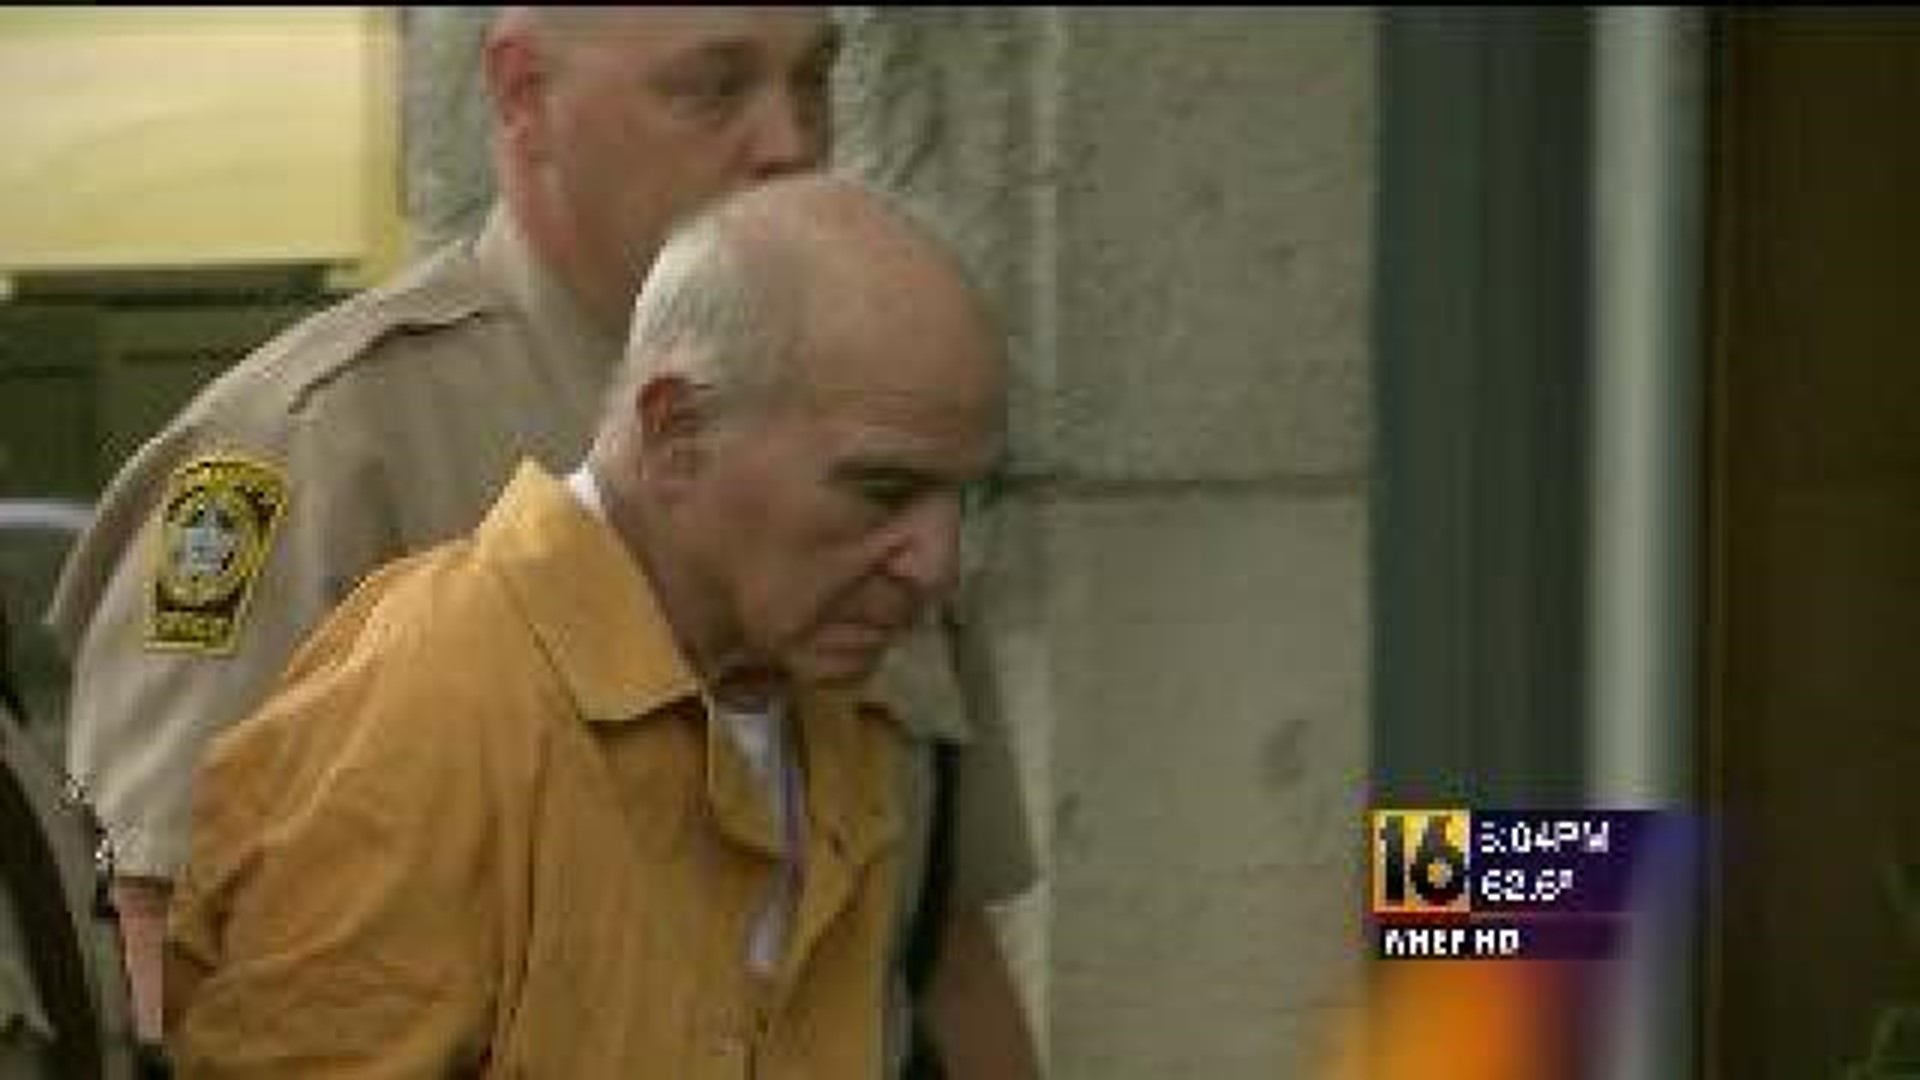 Hearing to Decide if Accused Murderer is Competent